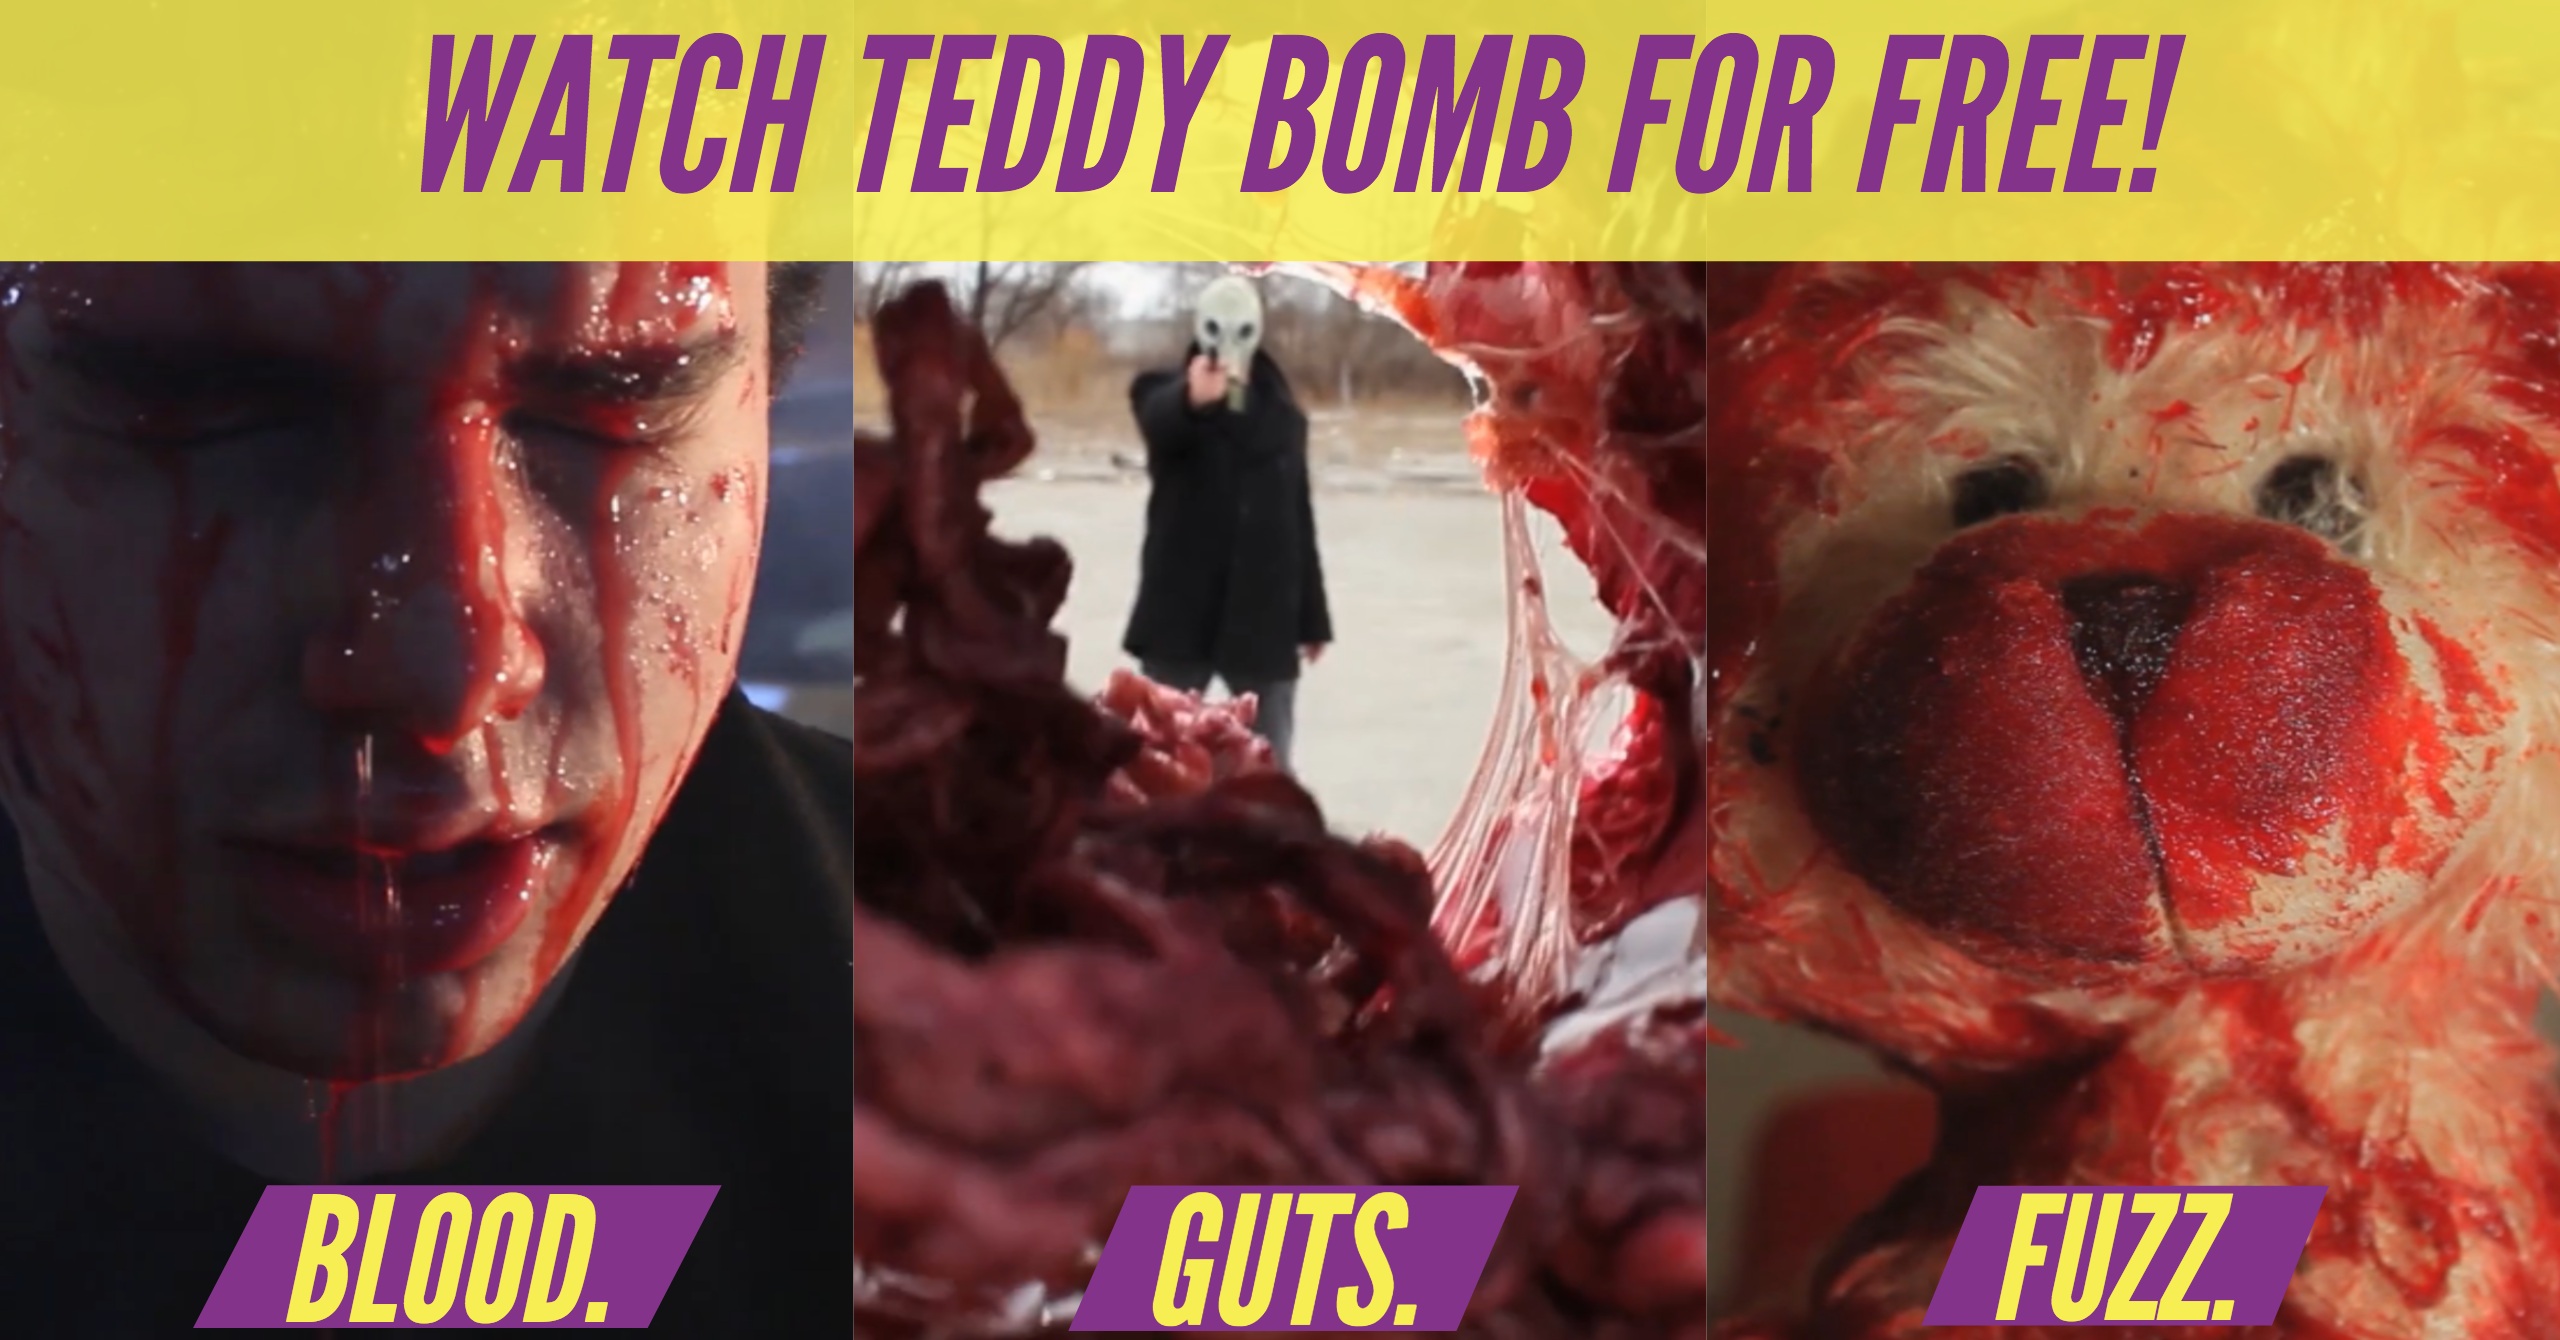 It’s true, you can watch Teddy Bomb for free!